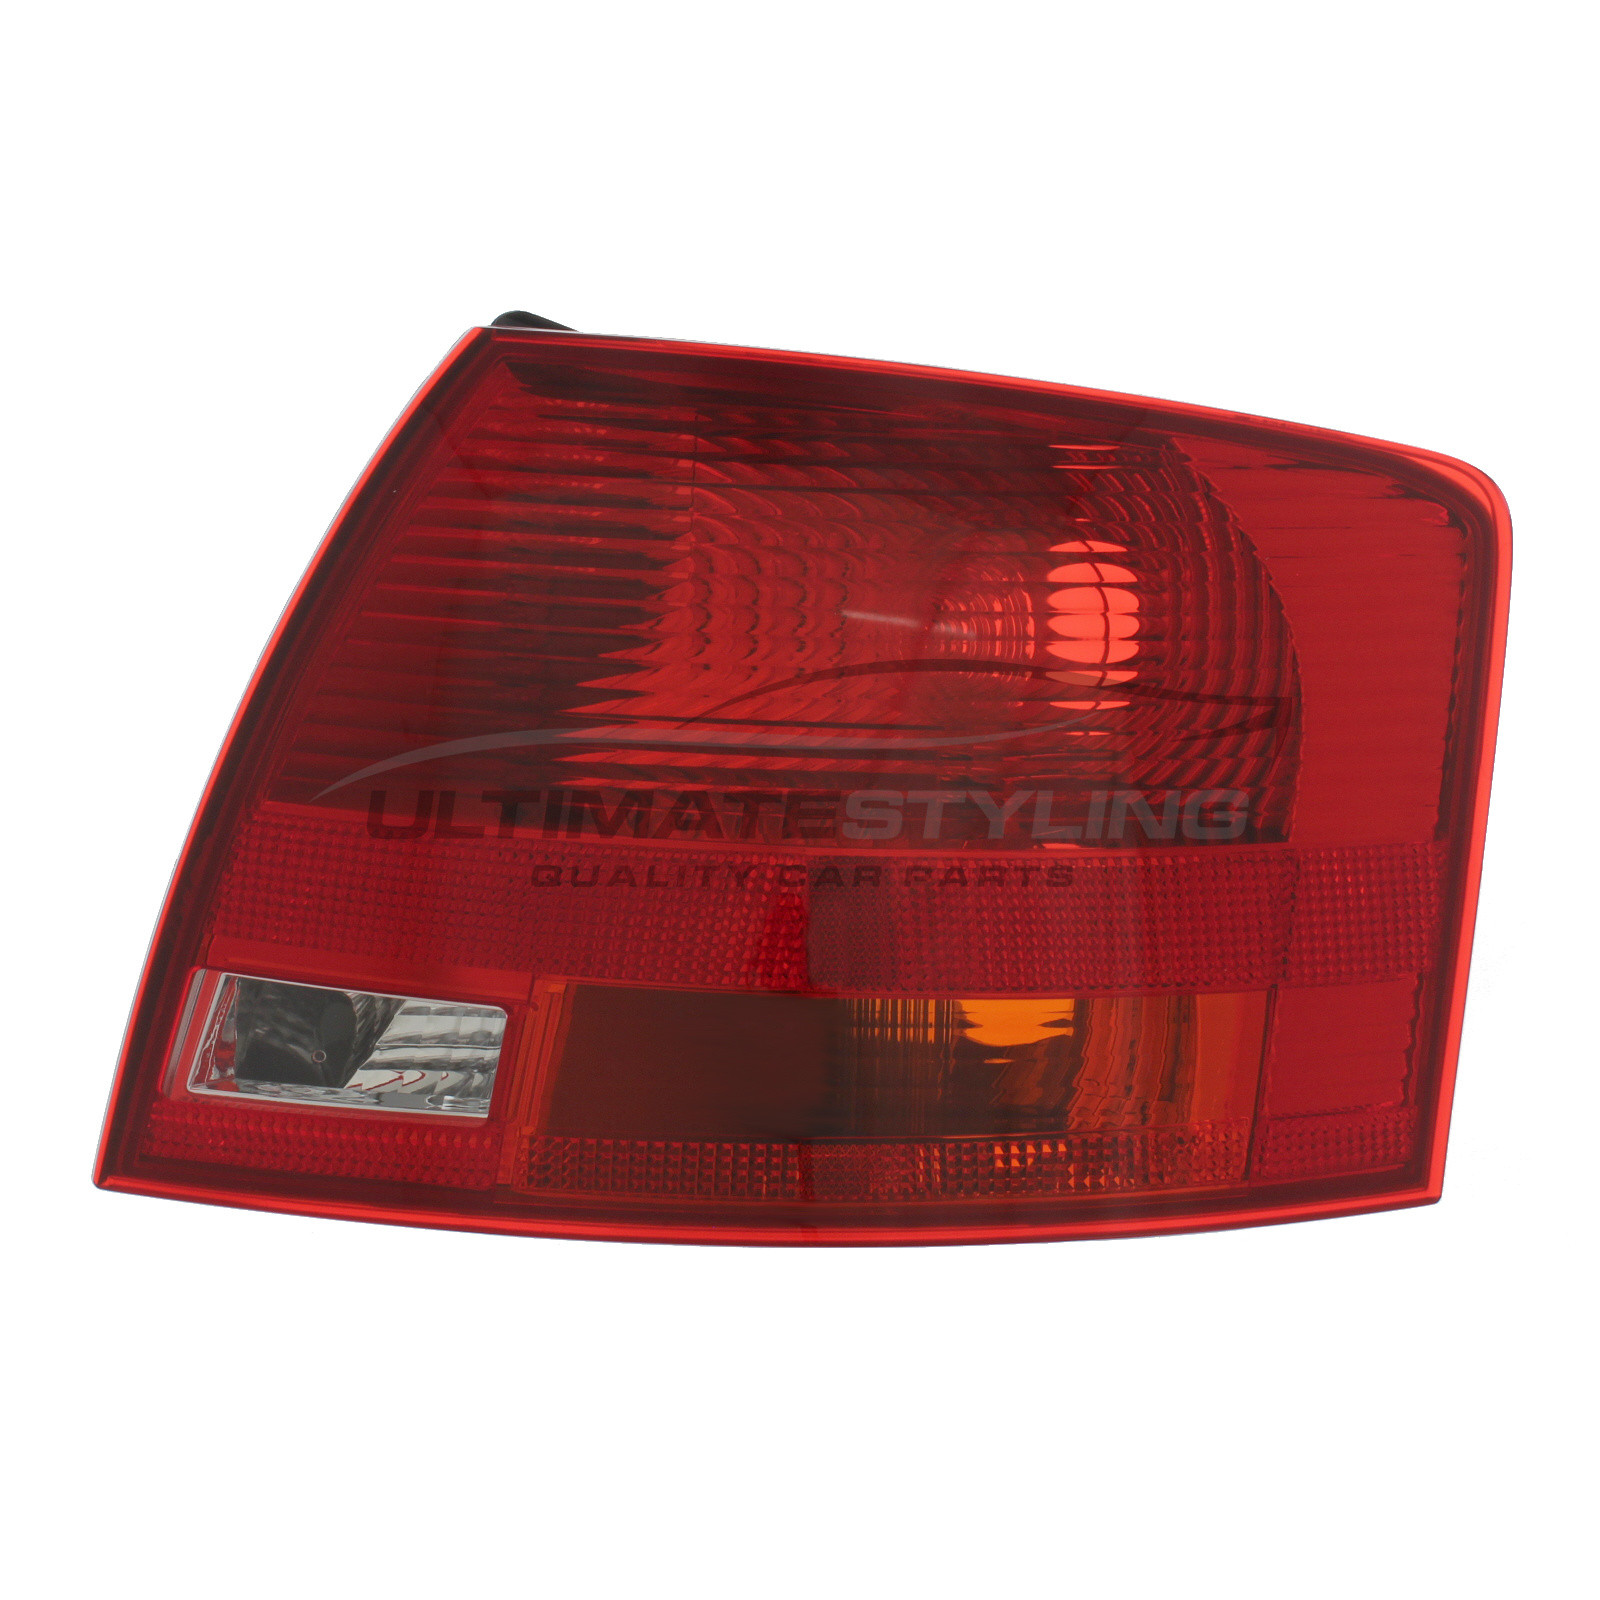 Audi A4 2004-2008 / Audi RS4 2006-2008 Non-LED Outer (Wing) Rear Light / Tail Light Excluding Bulb Holder Drivers Side (RH)